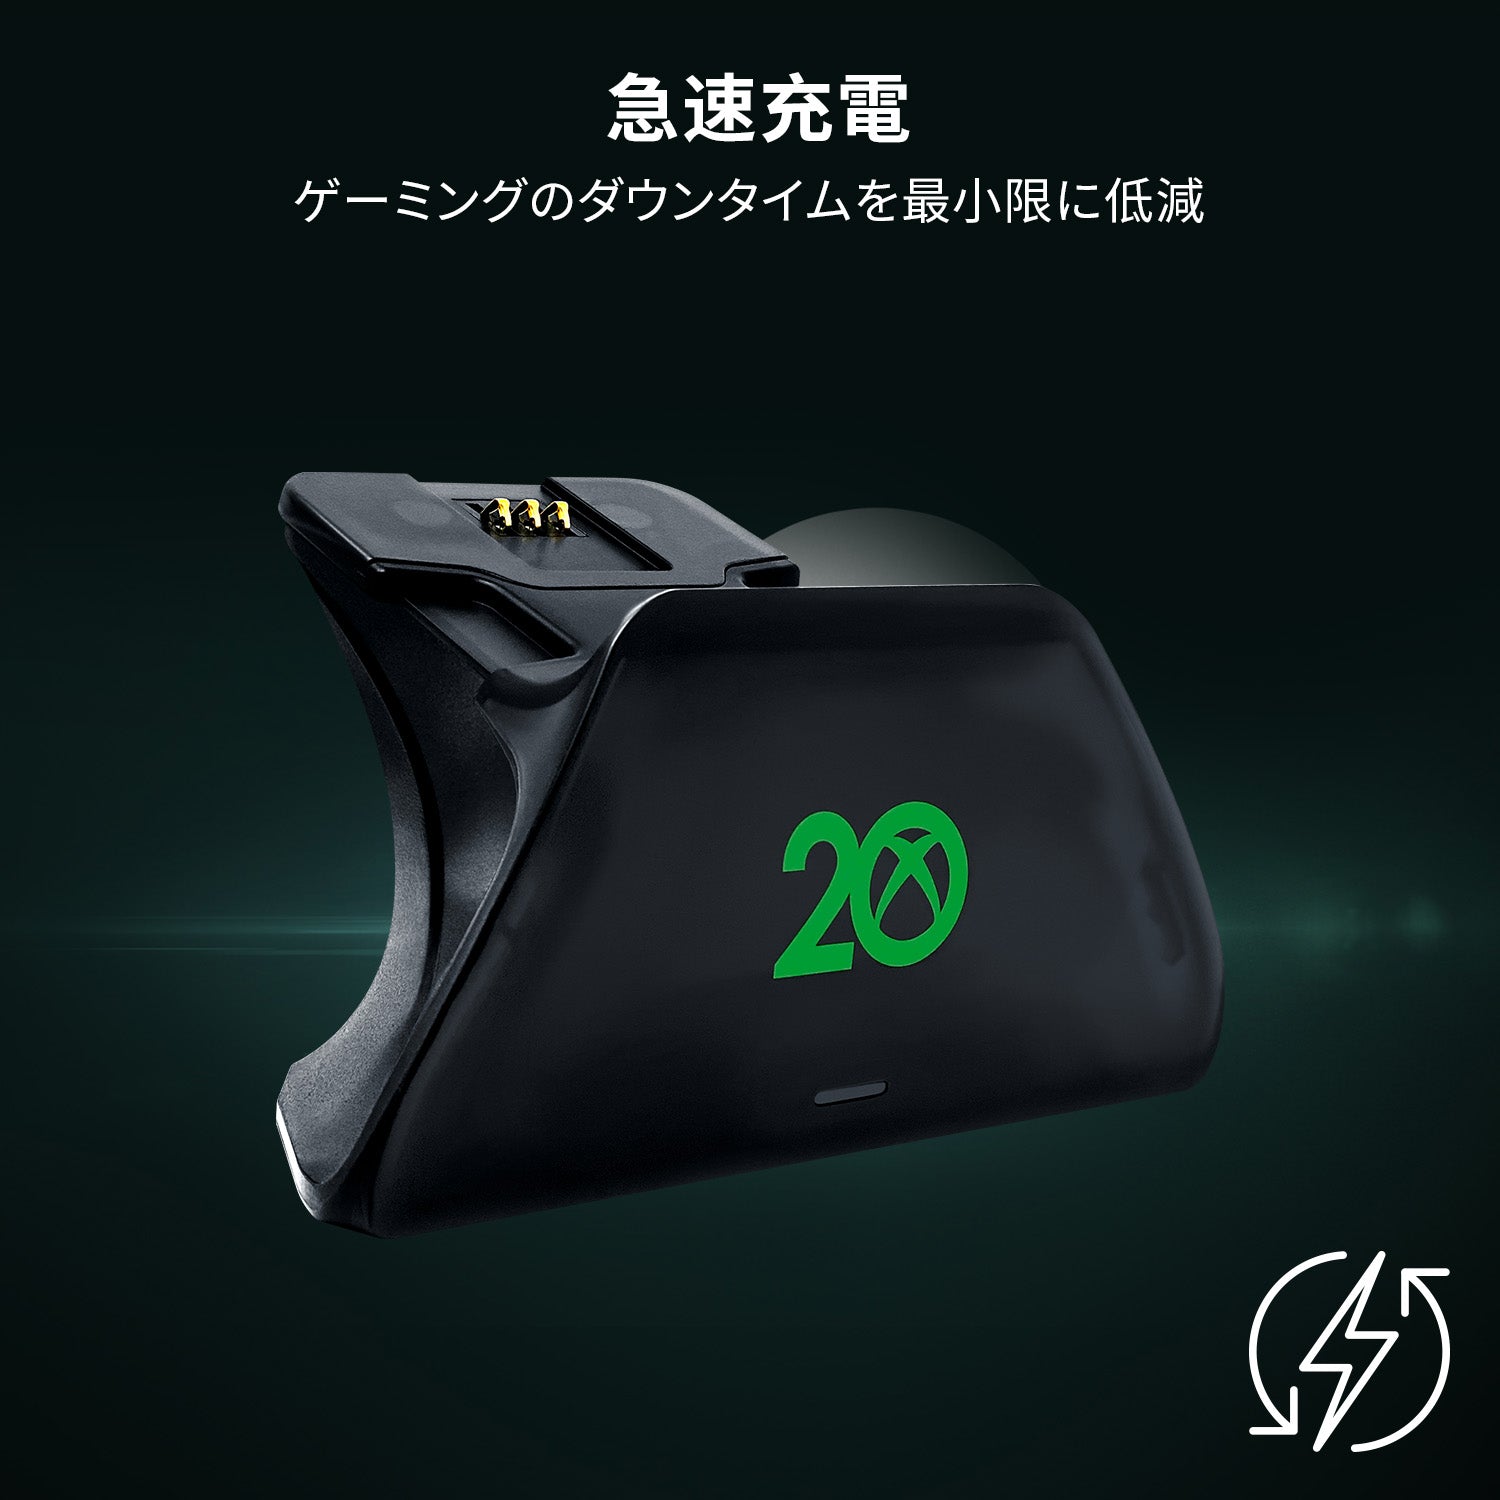 Razer Universal Quick Charging Stand for Xbox Xbox 20th Anniversary Limited Edition  ユニバーサル クイック チャージング スタンド thumbnail 2